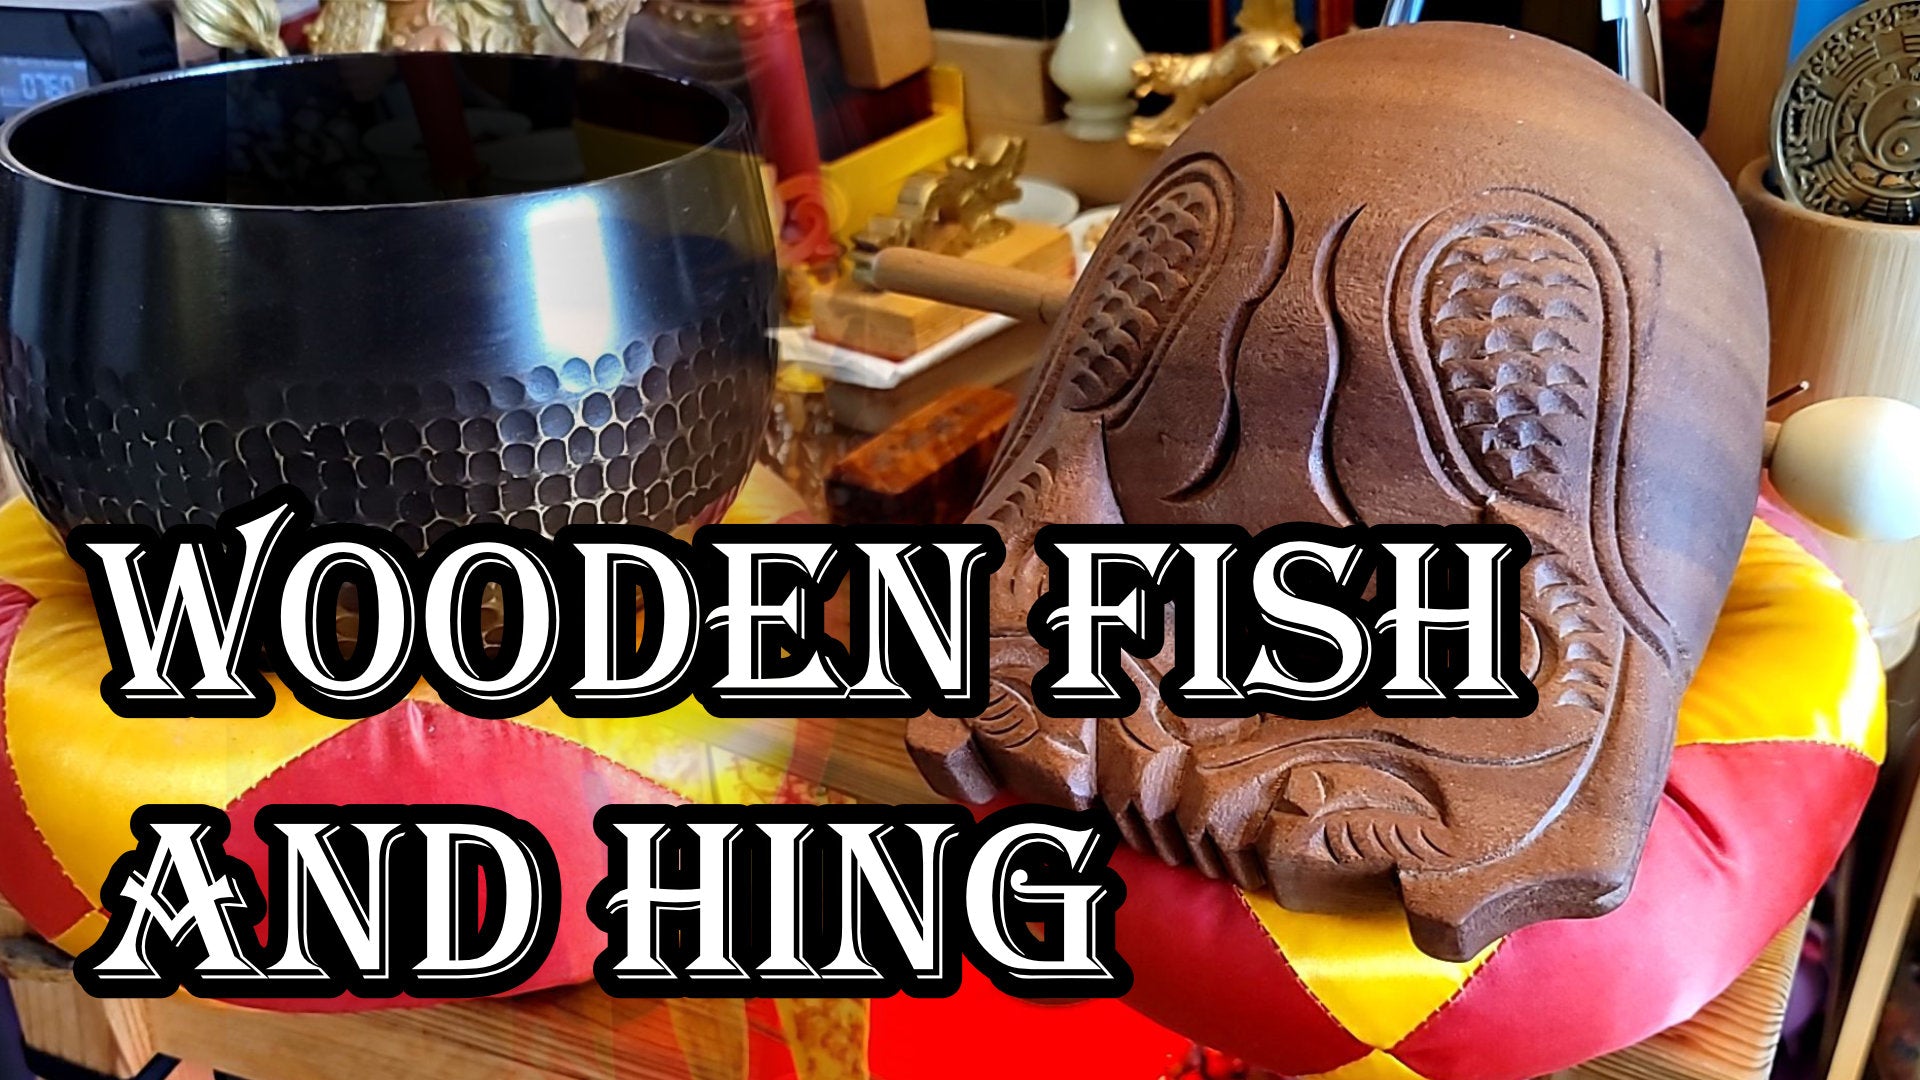 
          Wooden Fish and the Hing
        